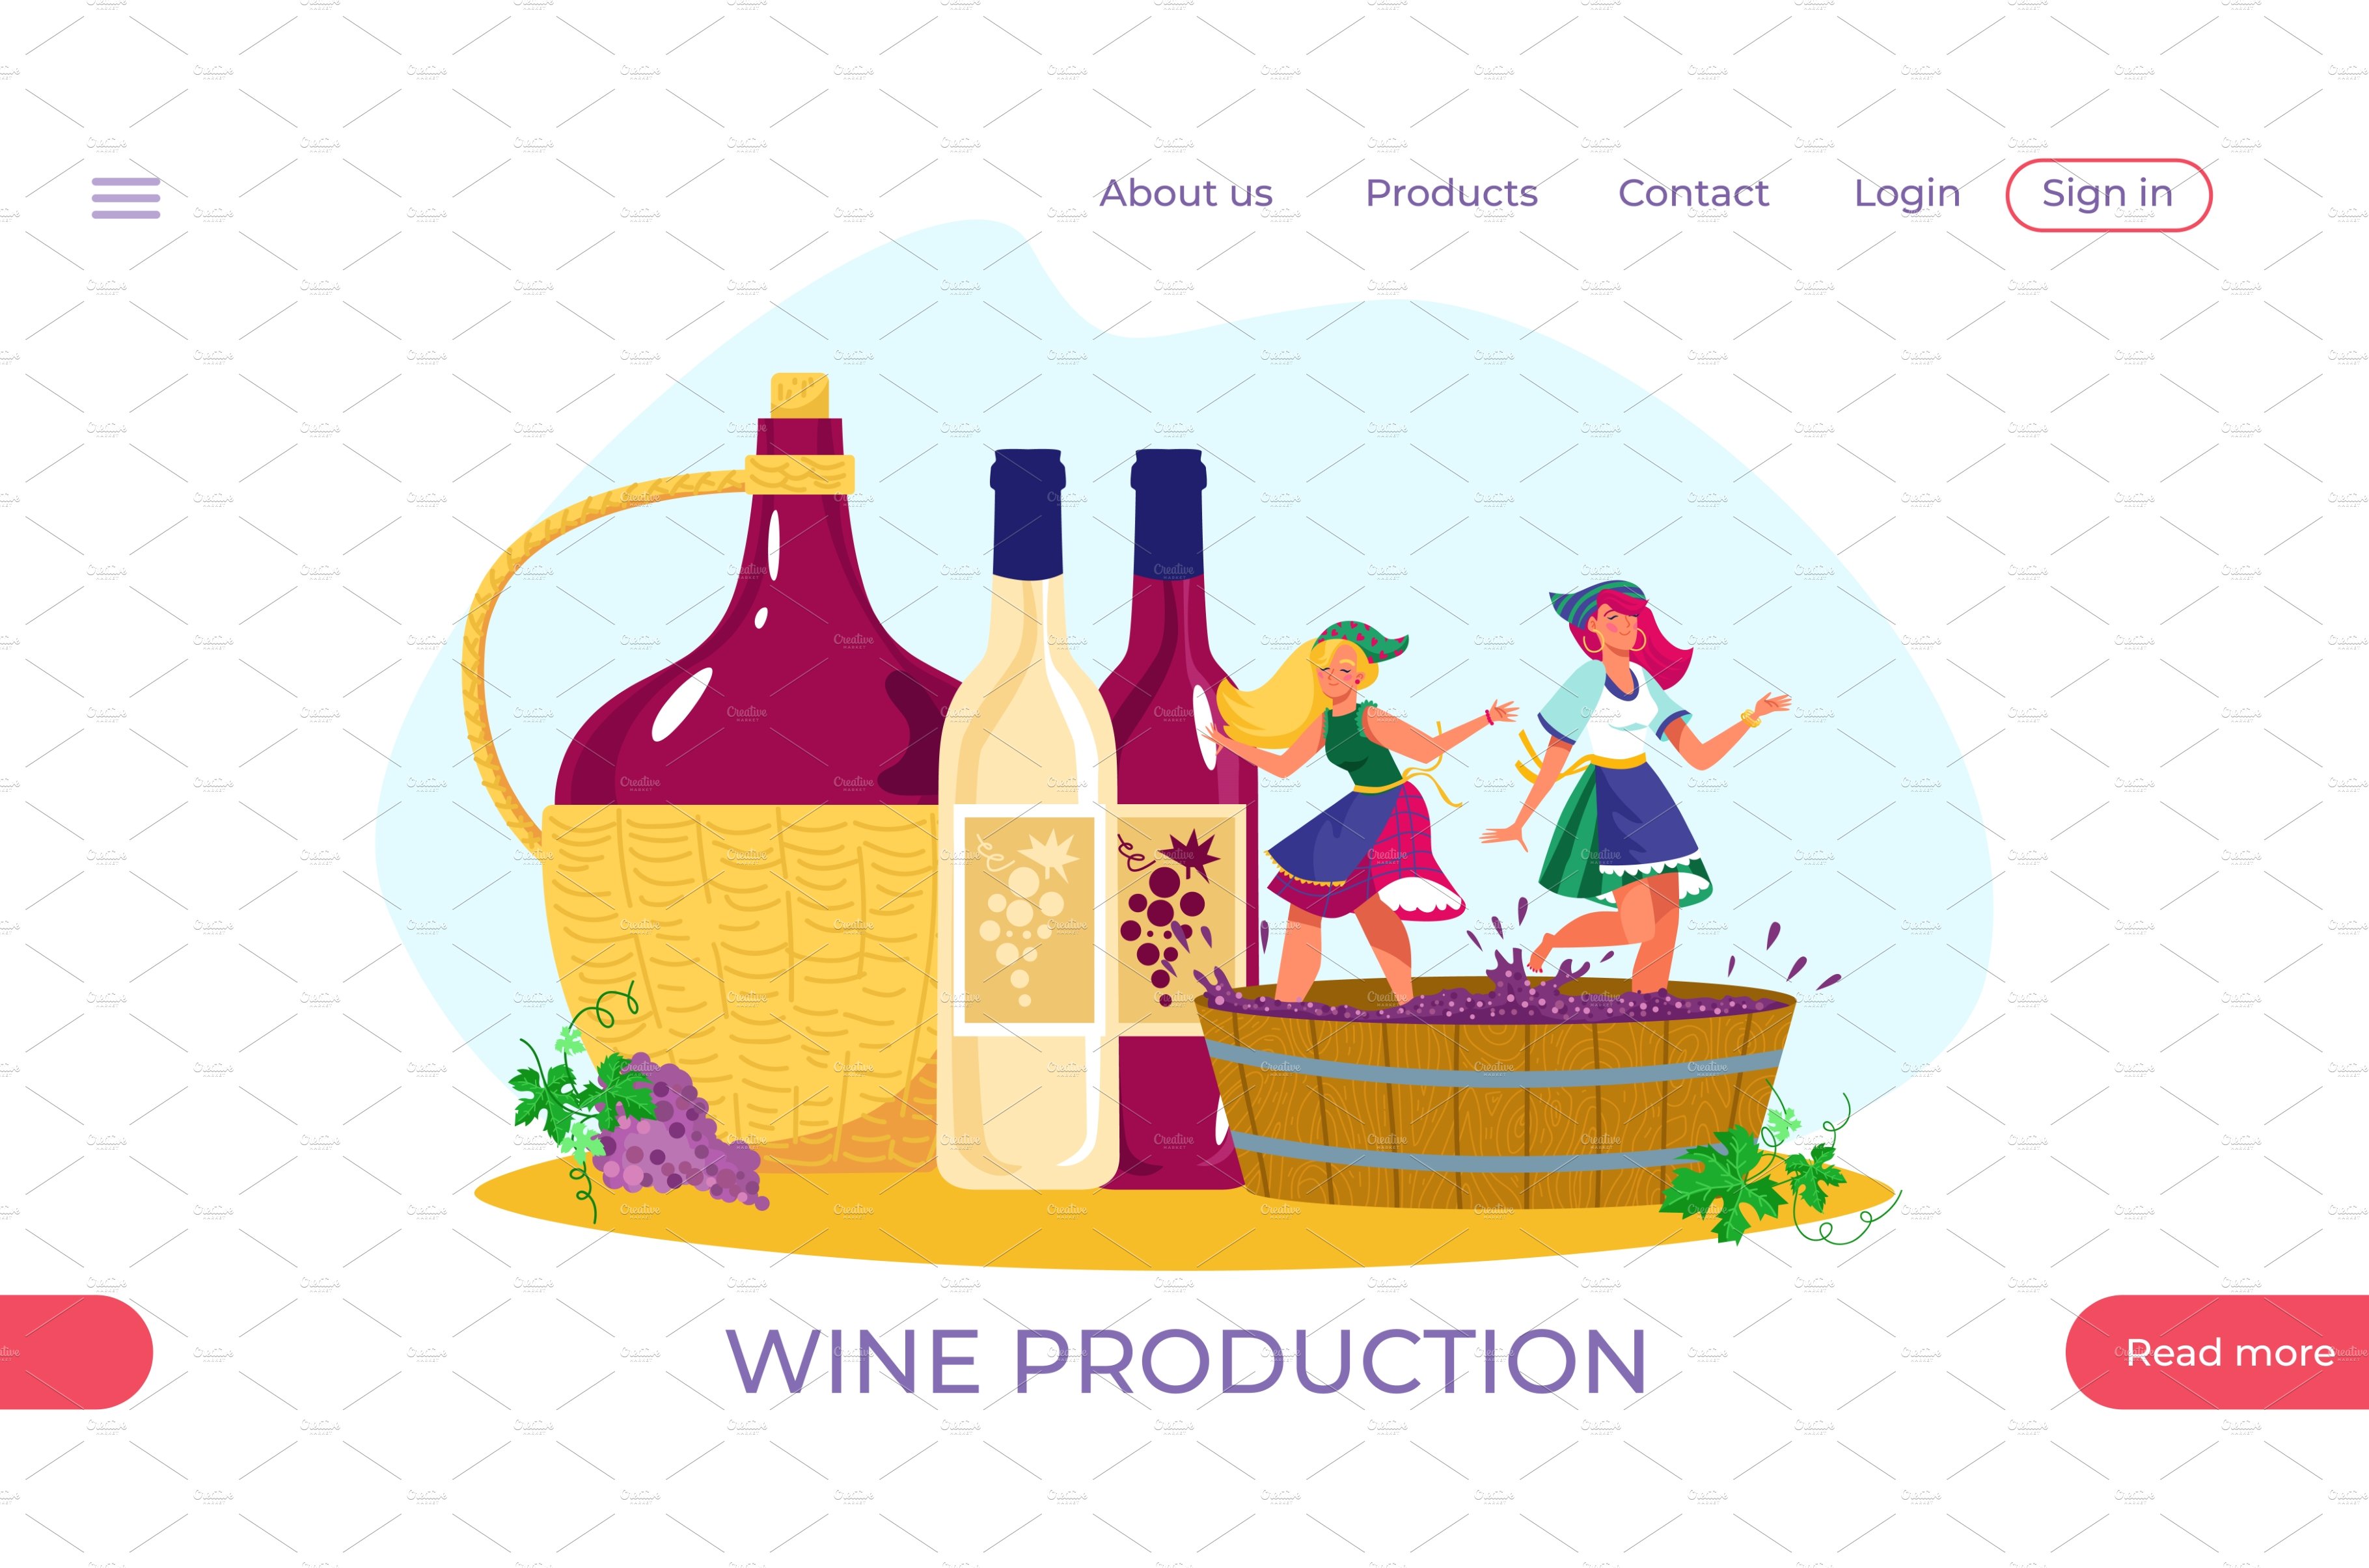 Wine beverage production web cover image.